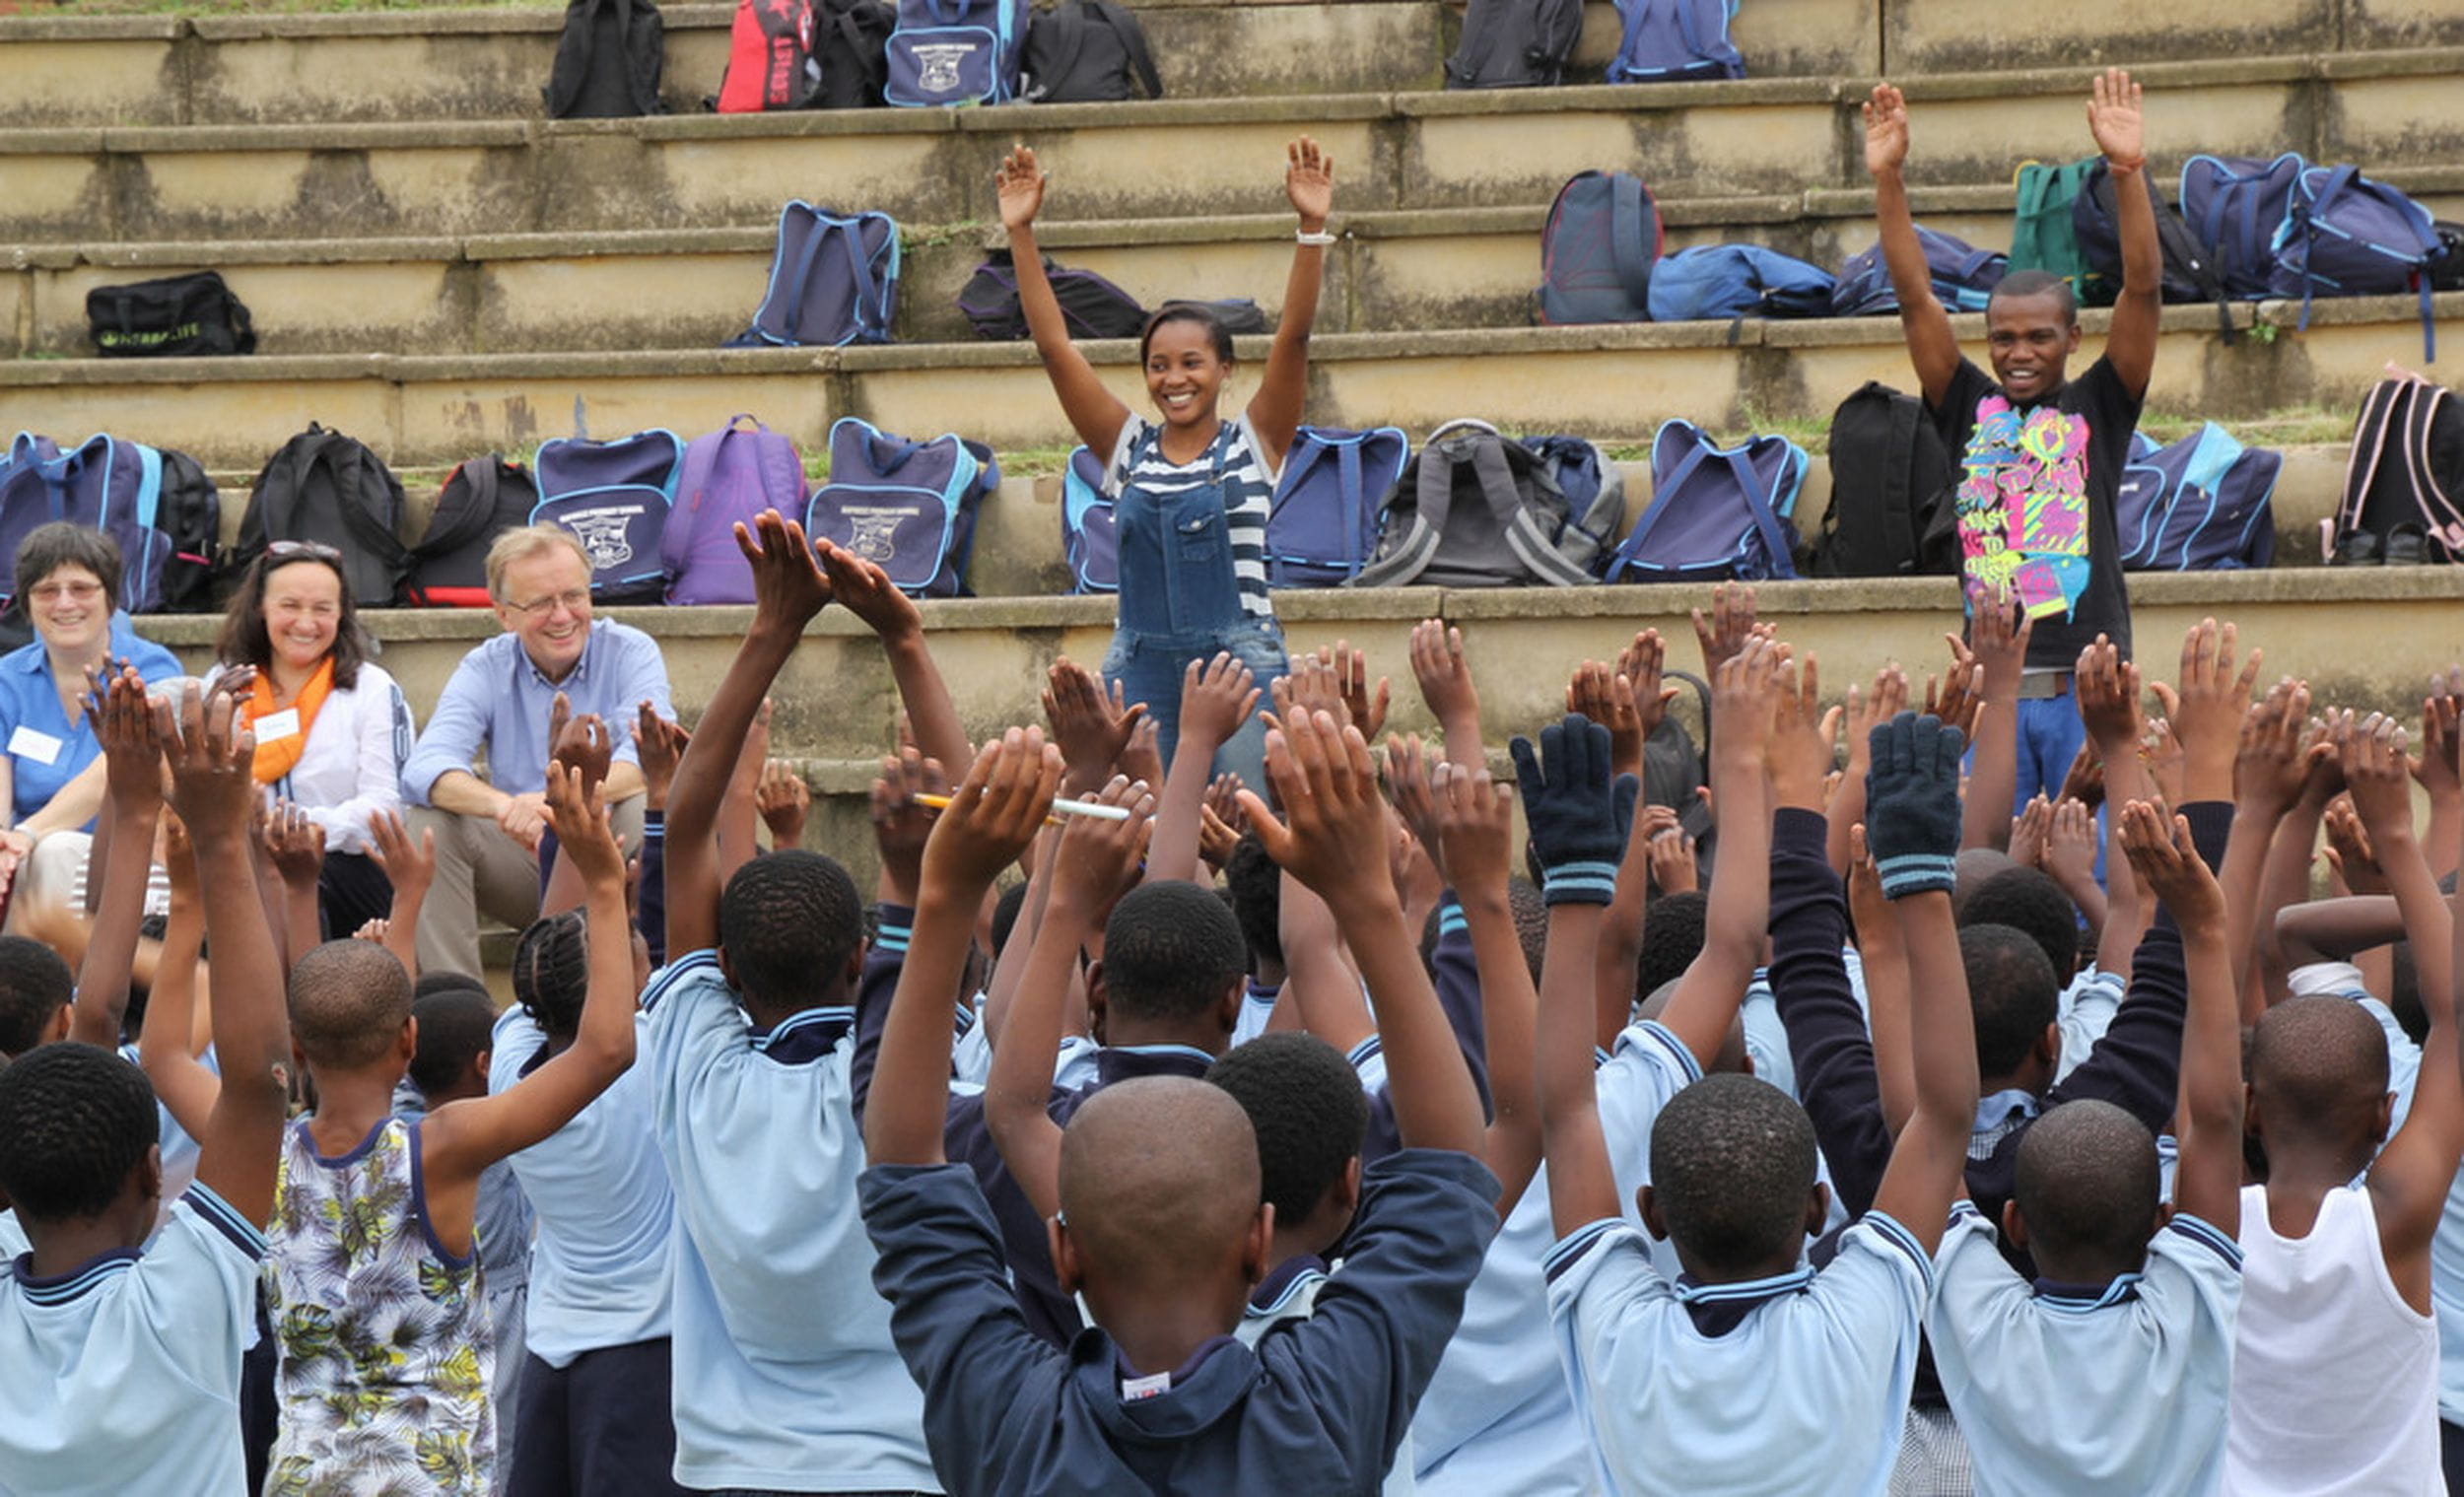 Youth Club des Partners iThembalethu (Bild: Afra Holtstiege)